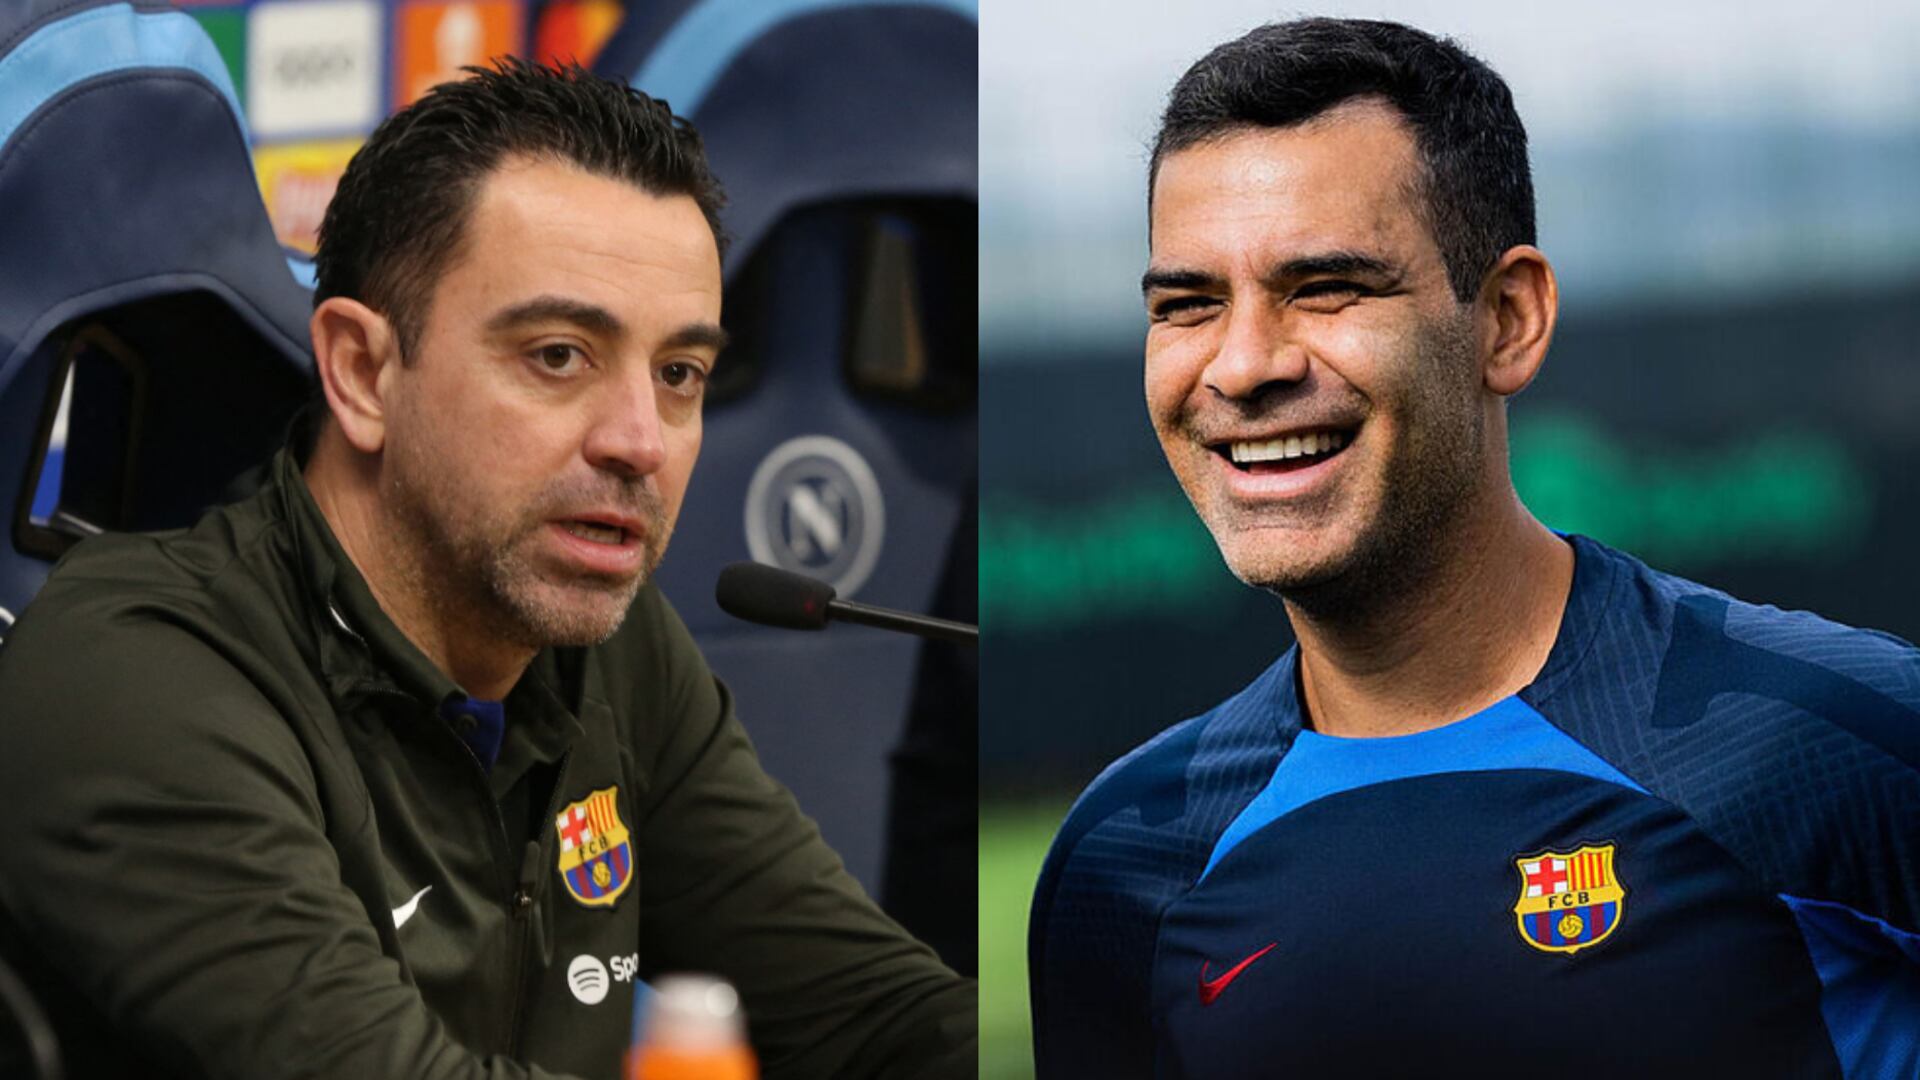 While Xavi will leave Barcelona, the shocking news of his possible replacement